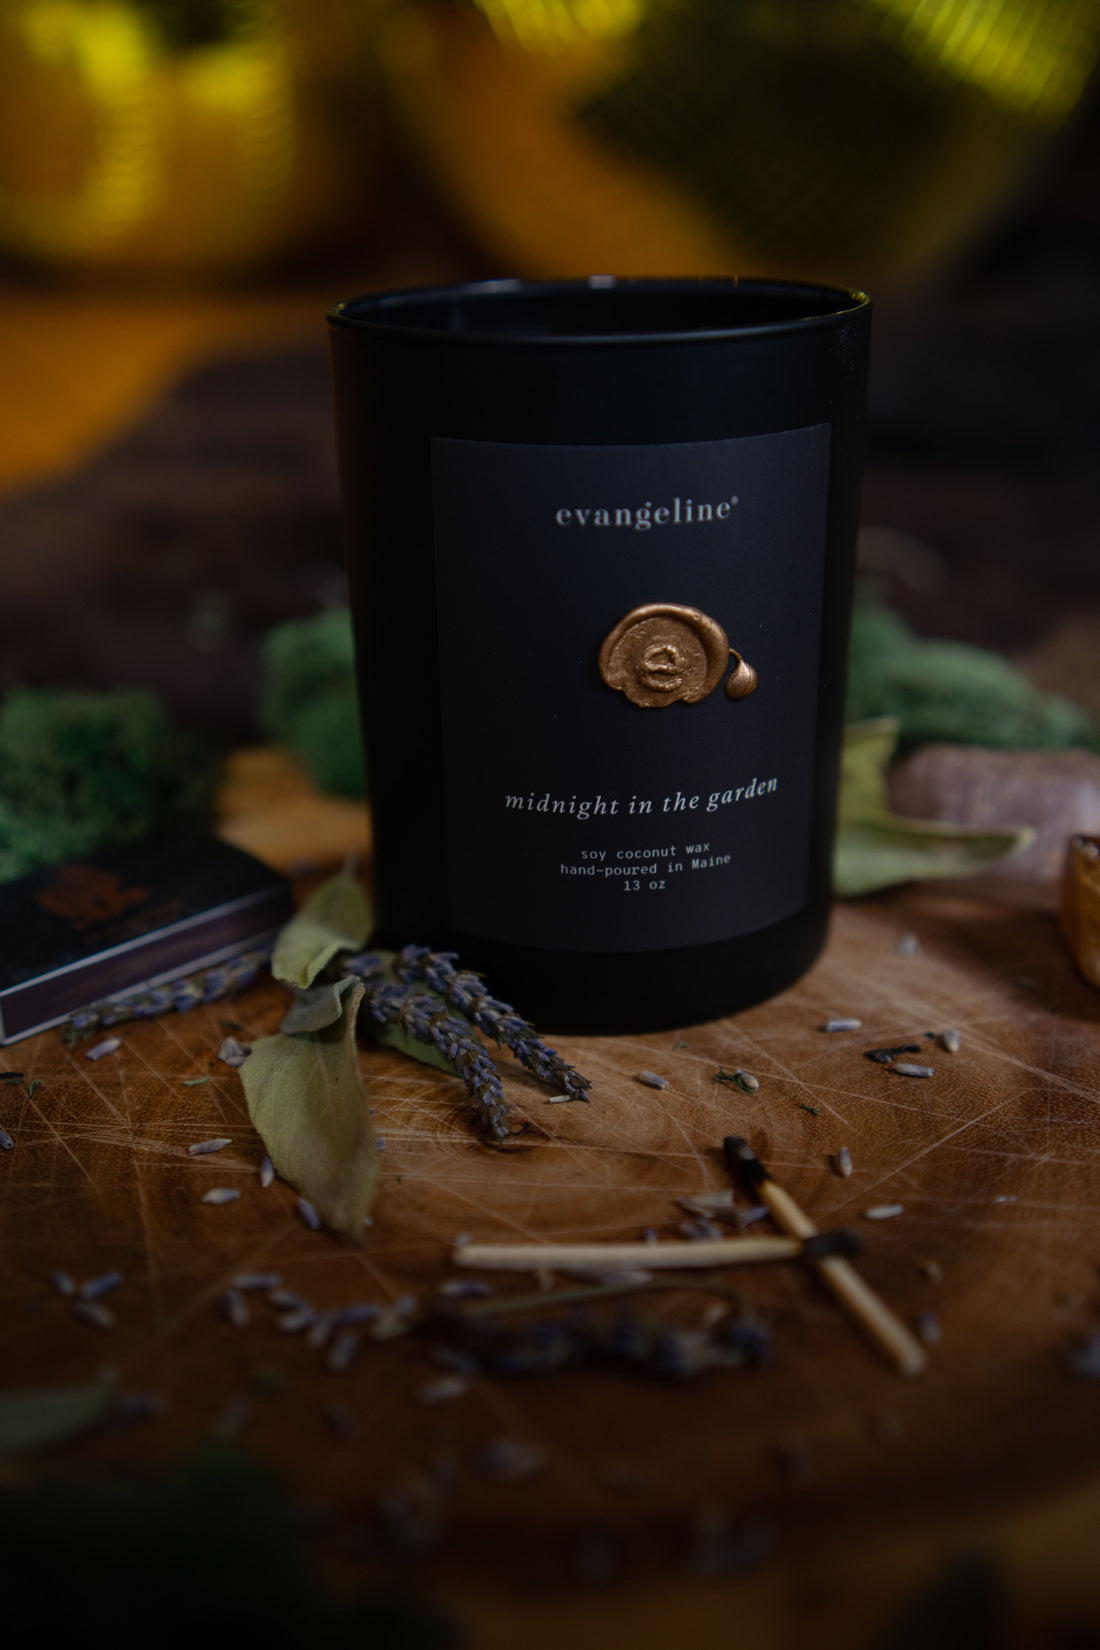 Matte black glass candle with matt black midnight in the garden label, hand-poured gold wax seal, surrounded by lavender, sage , moss and oak.